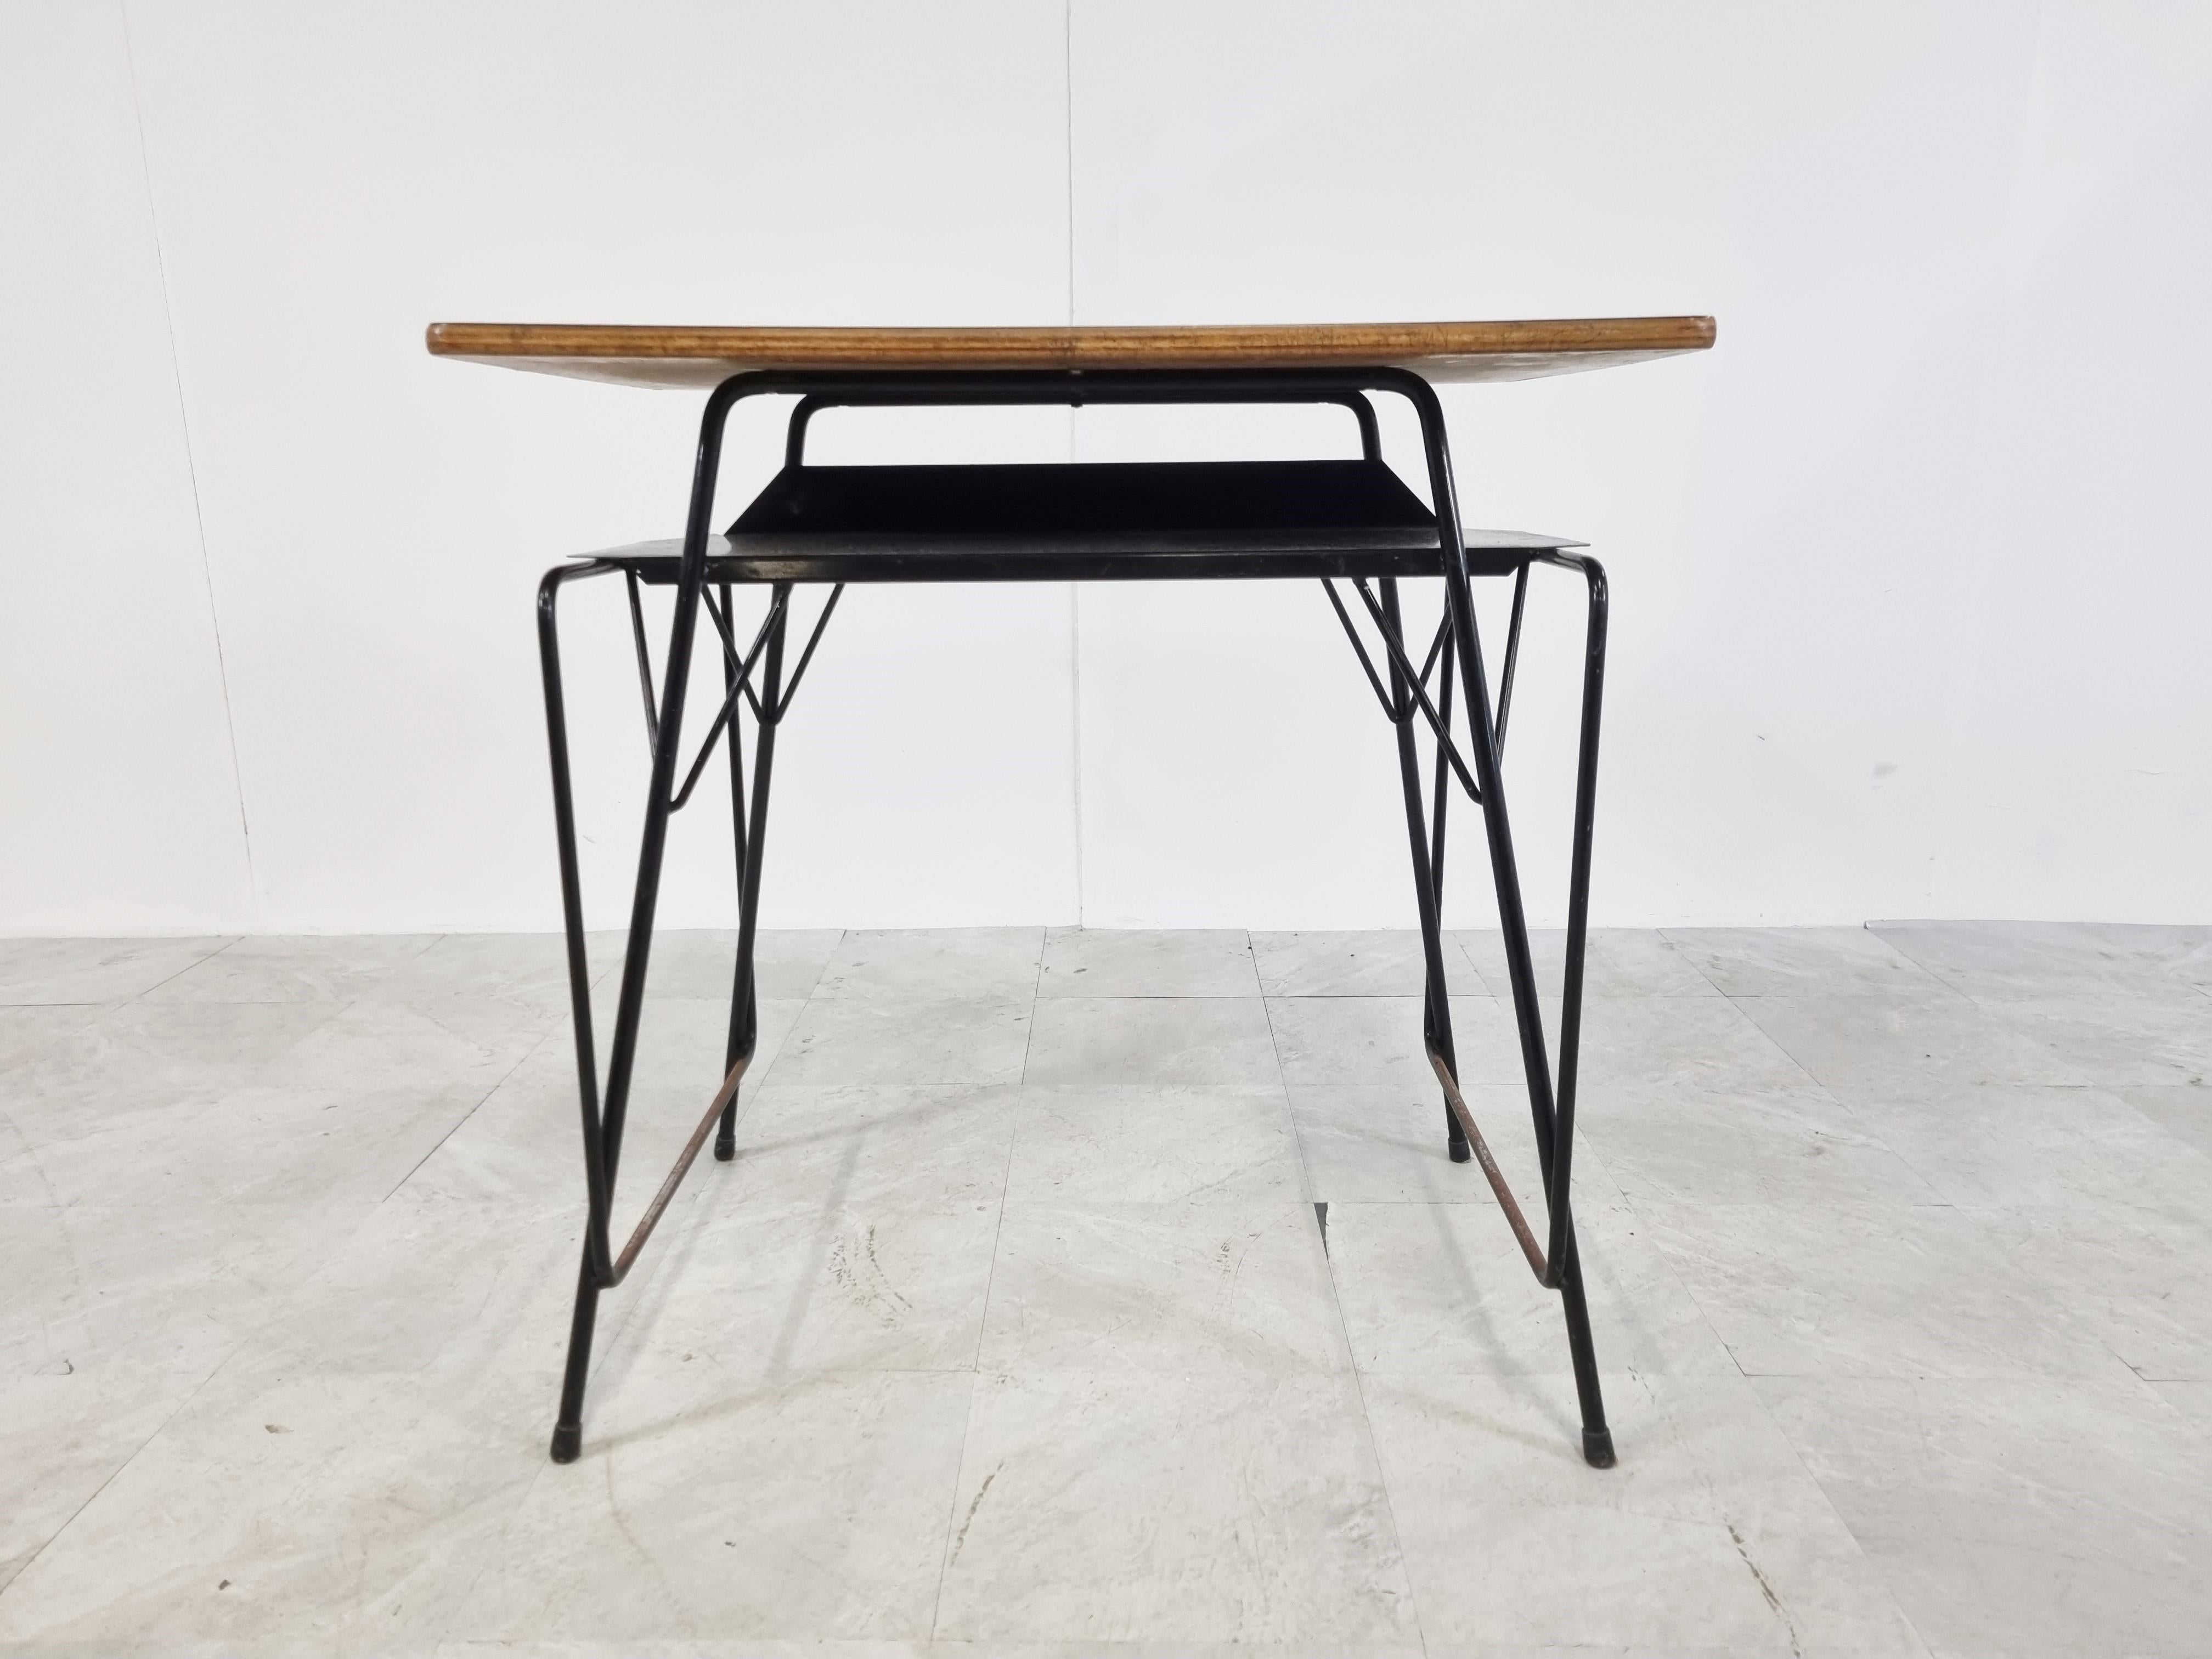 Mid century school desk designed by Willy Van Der Meeren and produced by Tubax in Belgium.

Industrial design which was widely used in schools. Sadly troughout the time when schools changed furniture, a lot of these disappeared and where